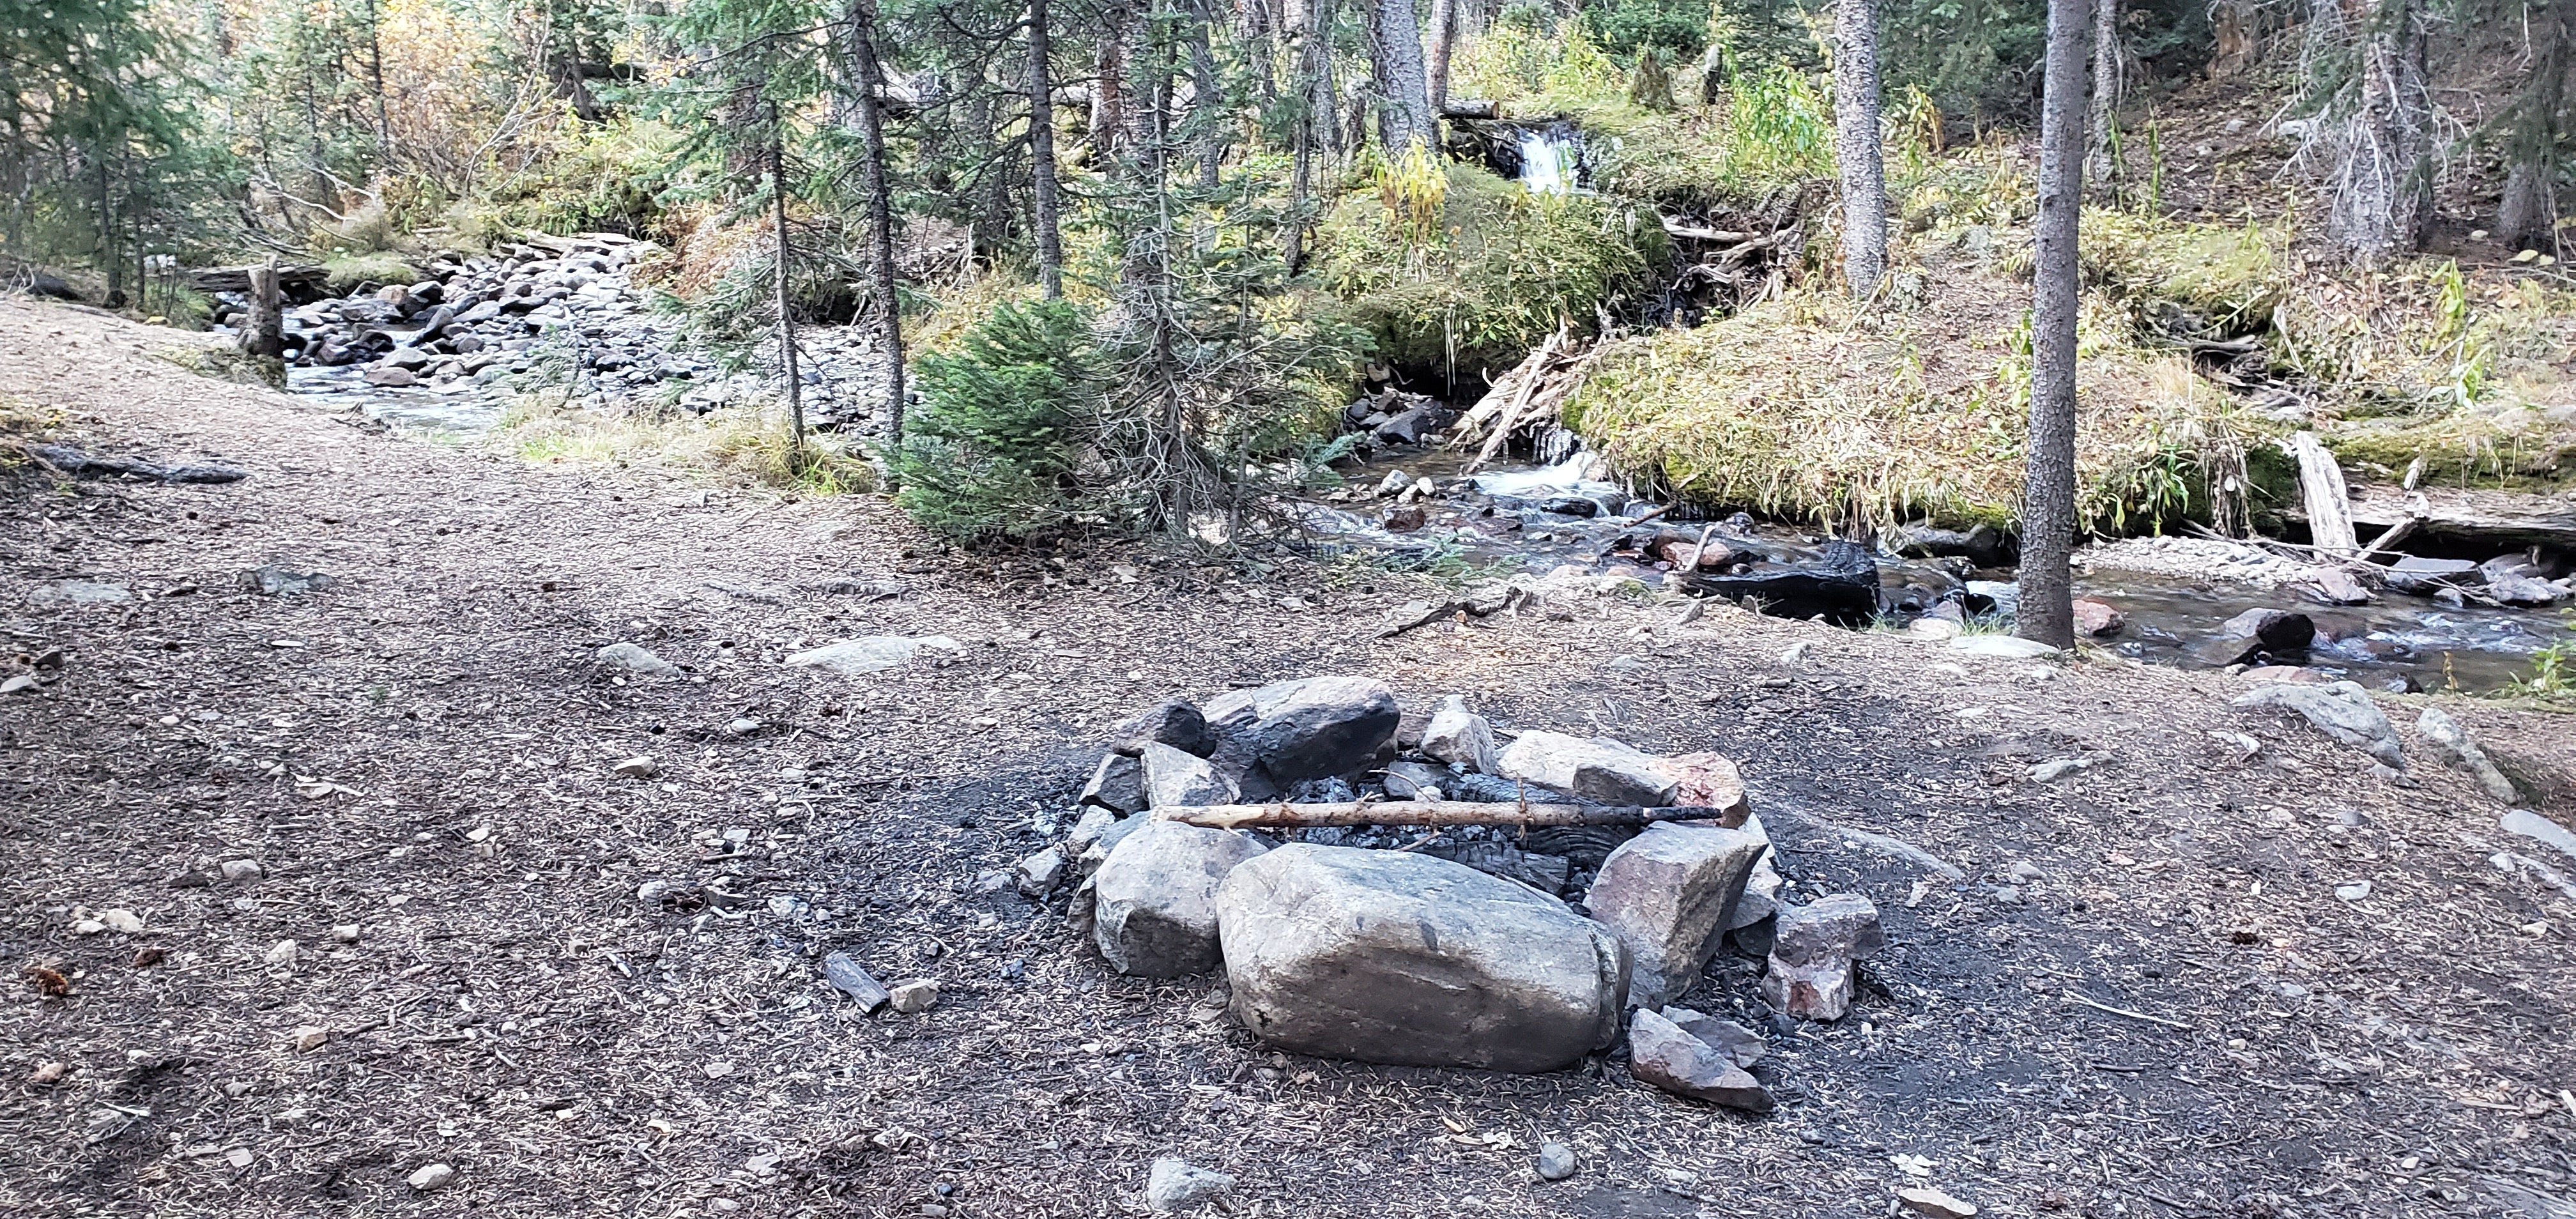 Camper submitted image from Saints John Trail Roadside Campsites - 4